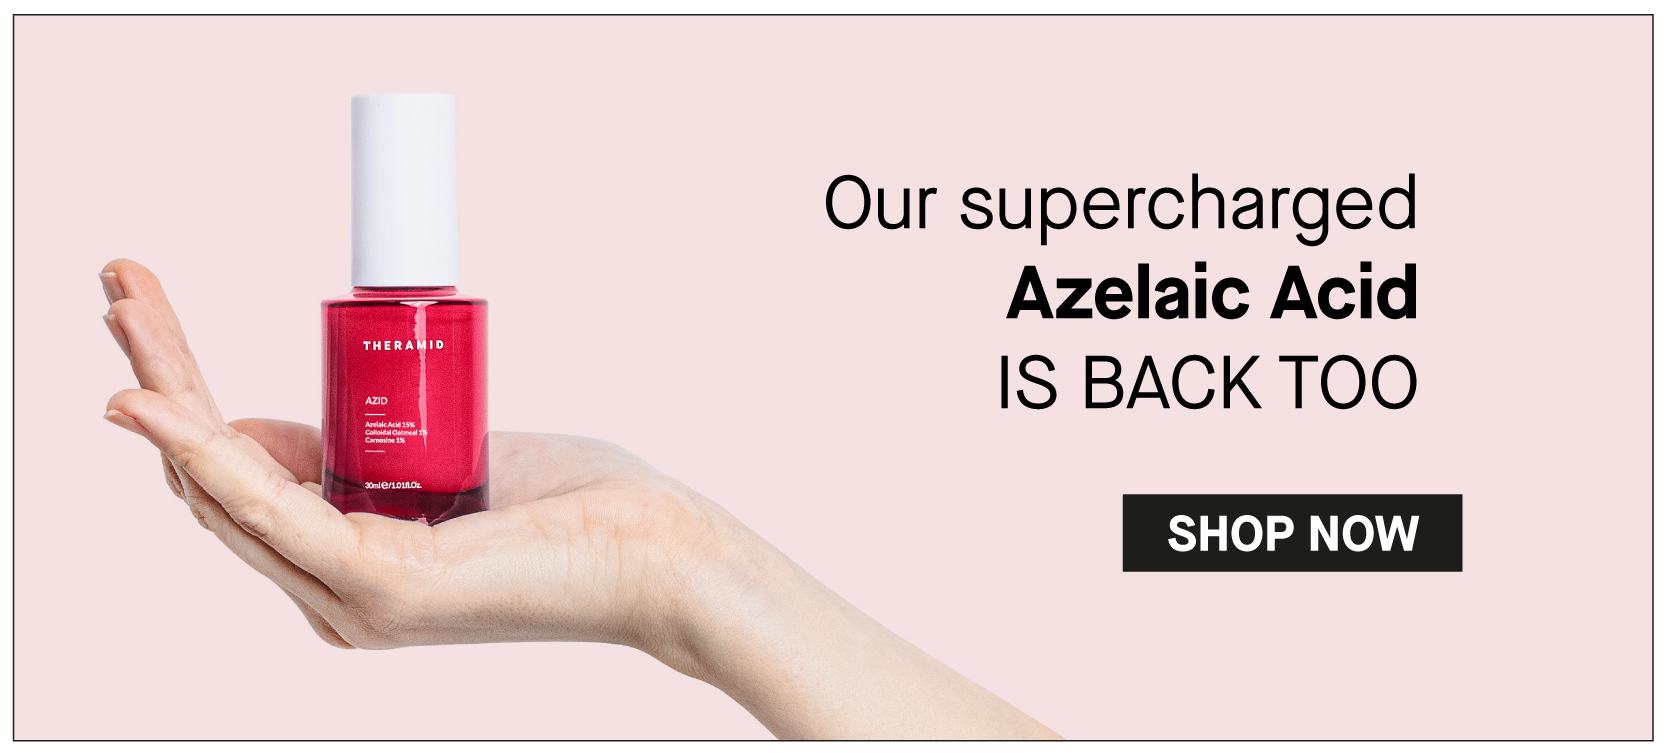  Our supercharged Azelaic Acid IS BACK TOO 